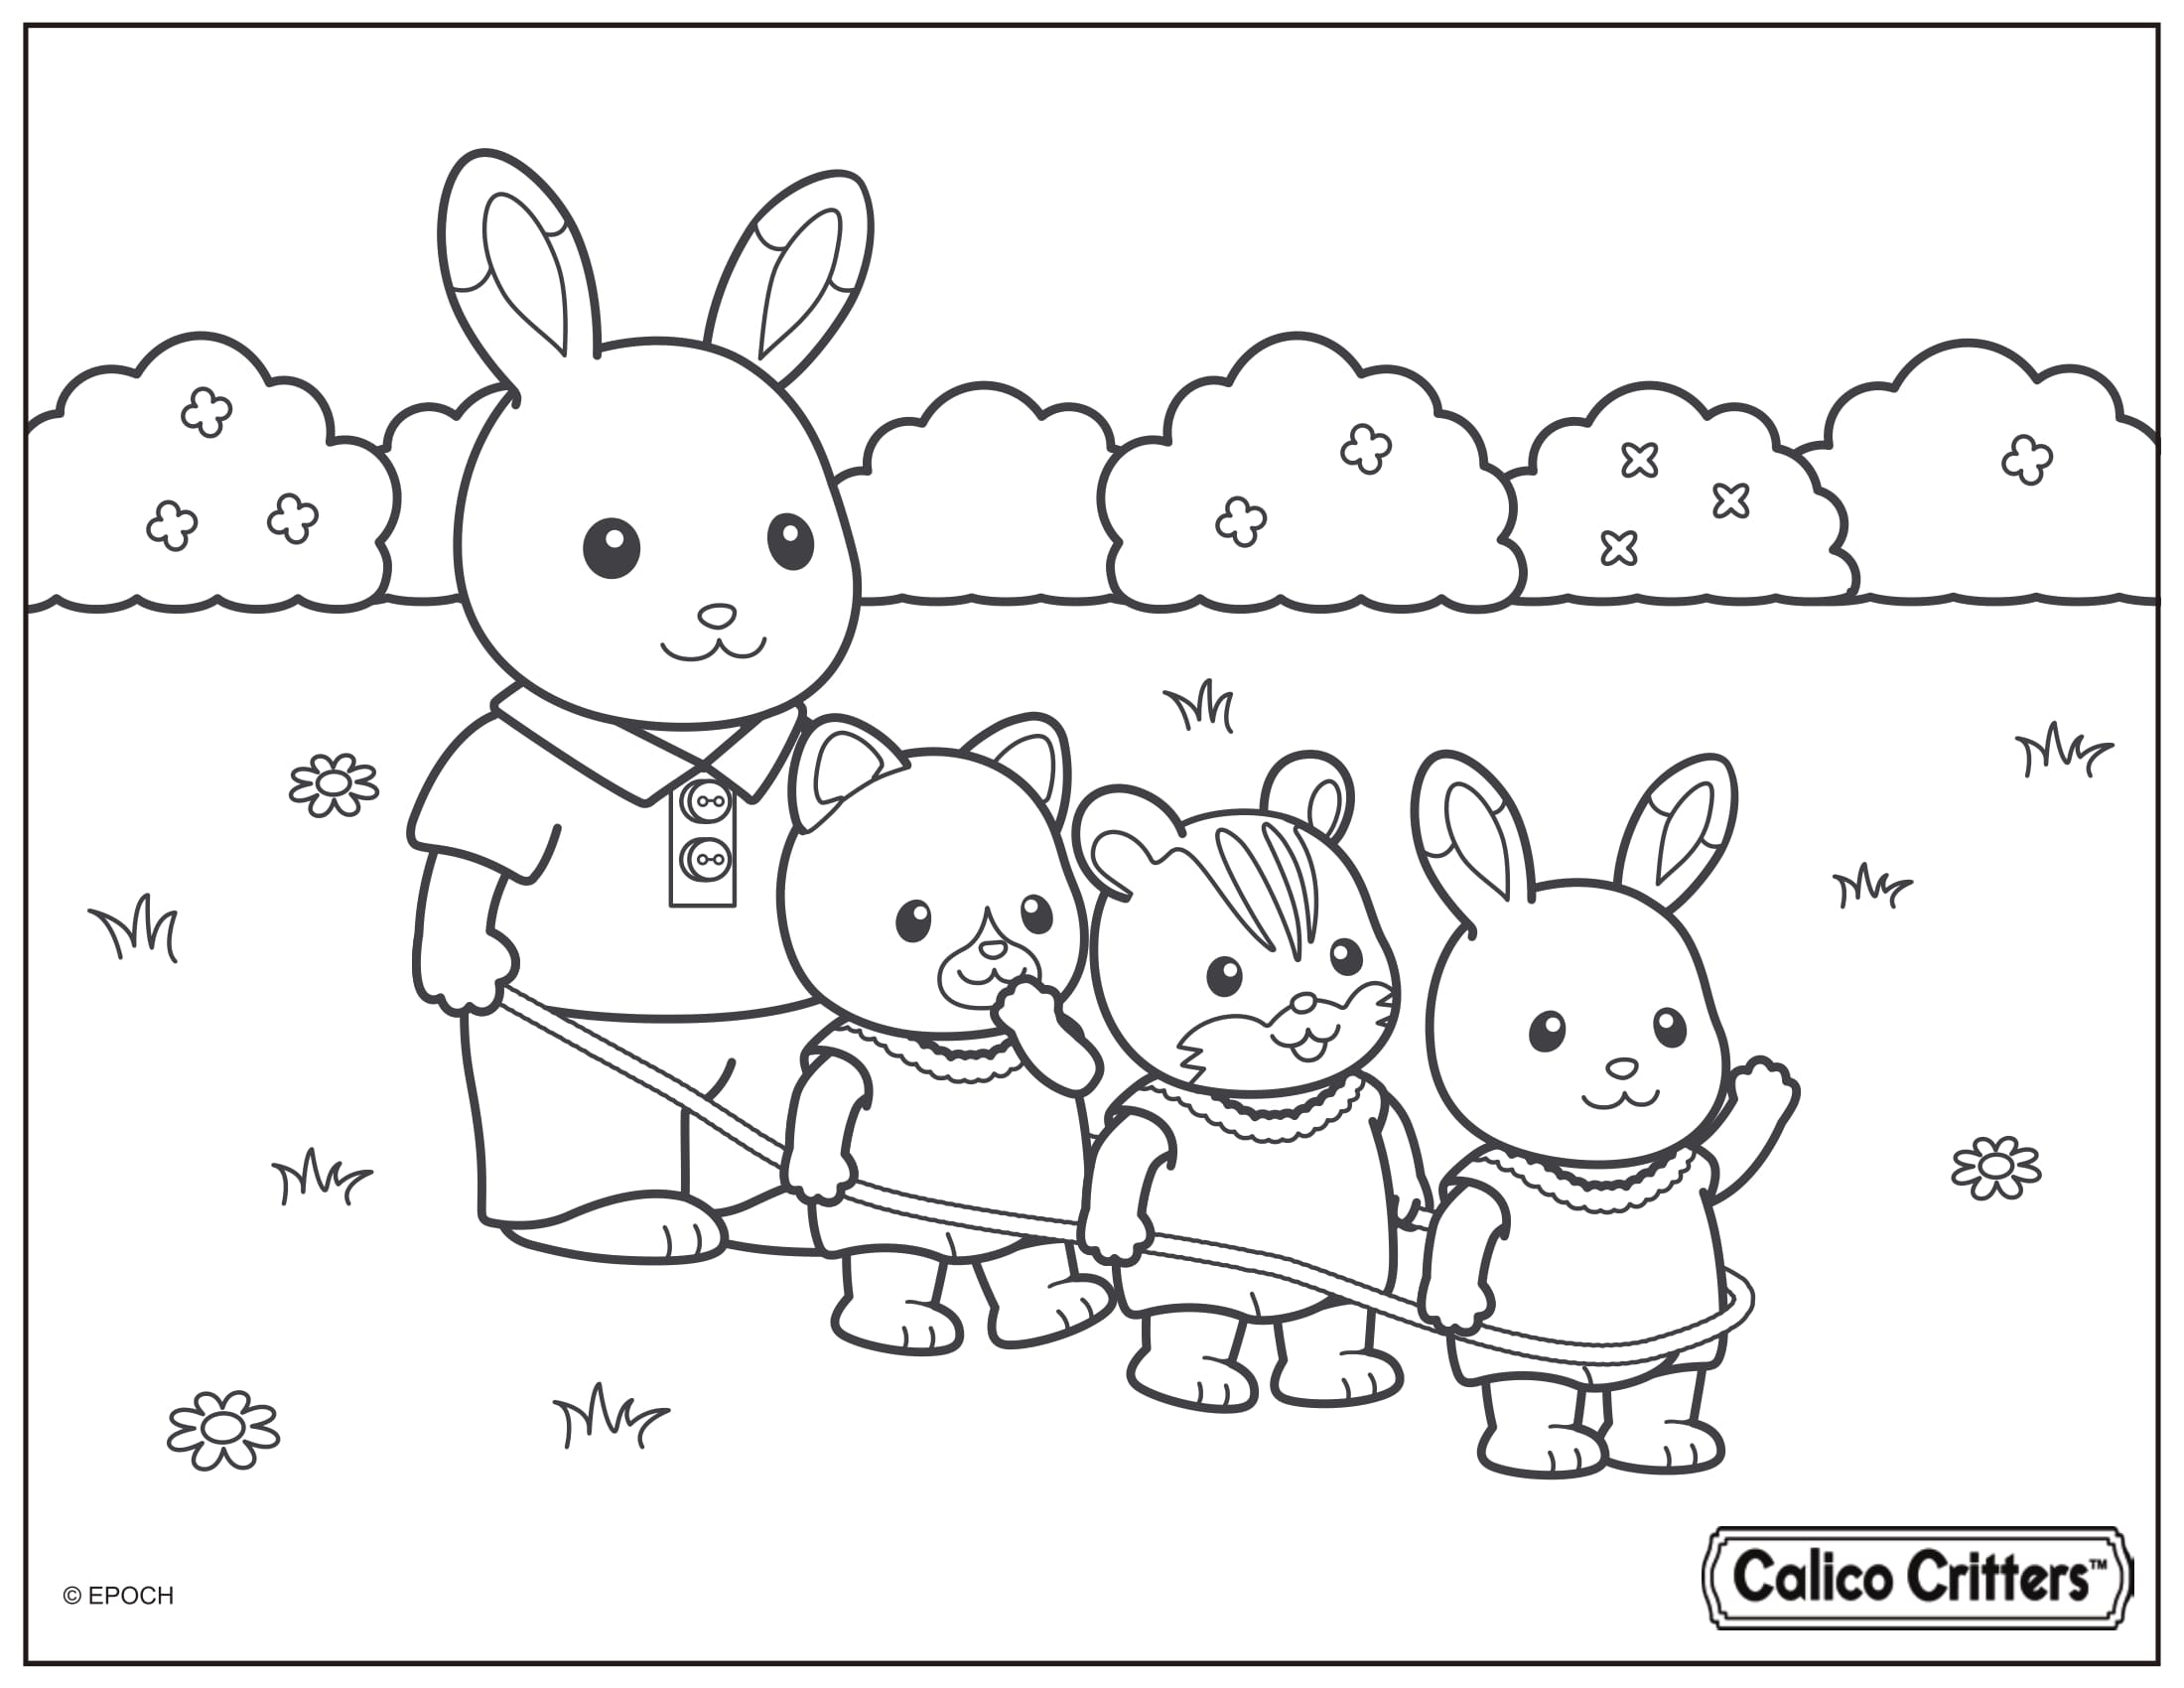 Calico Critters Playing With Kids In The Yard